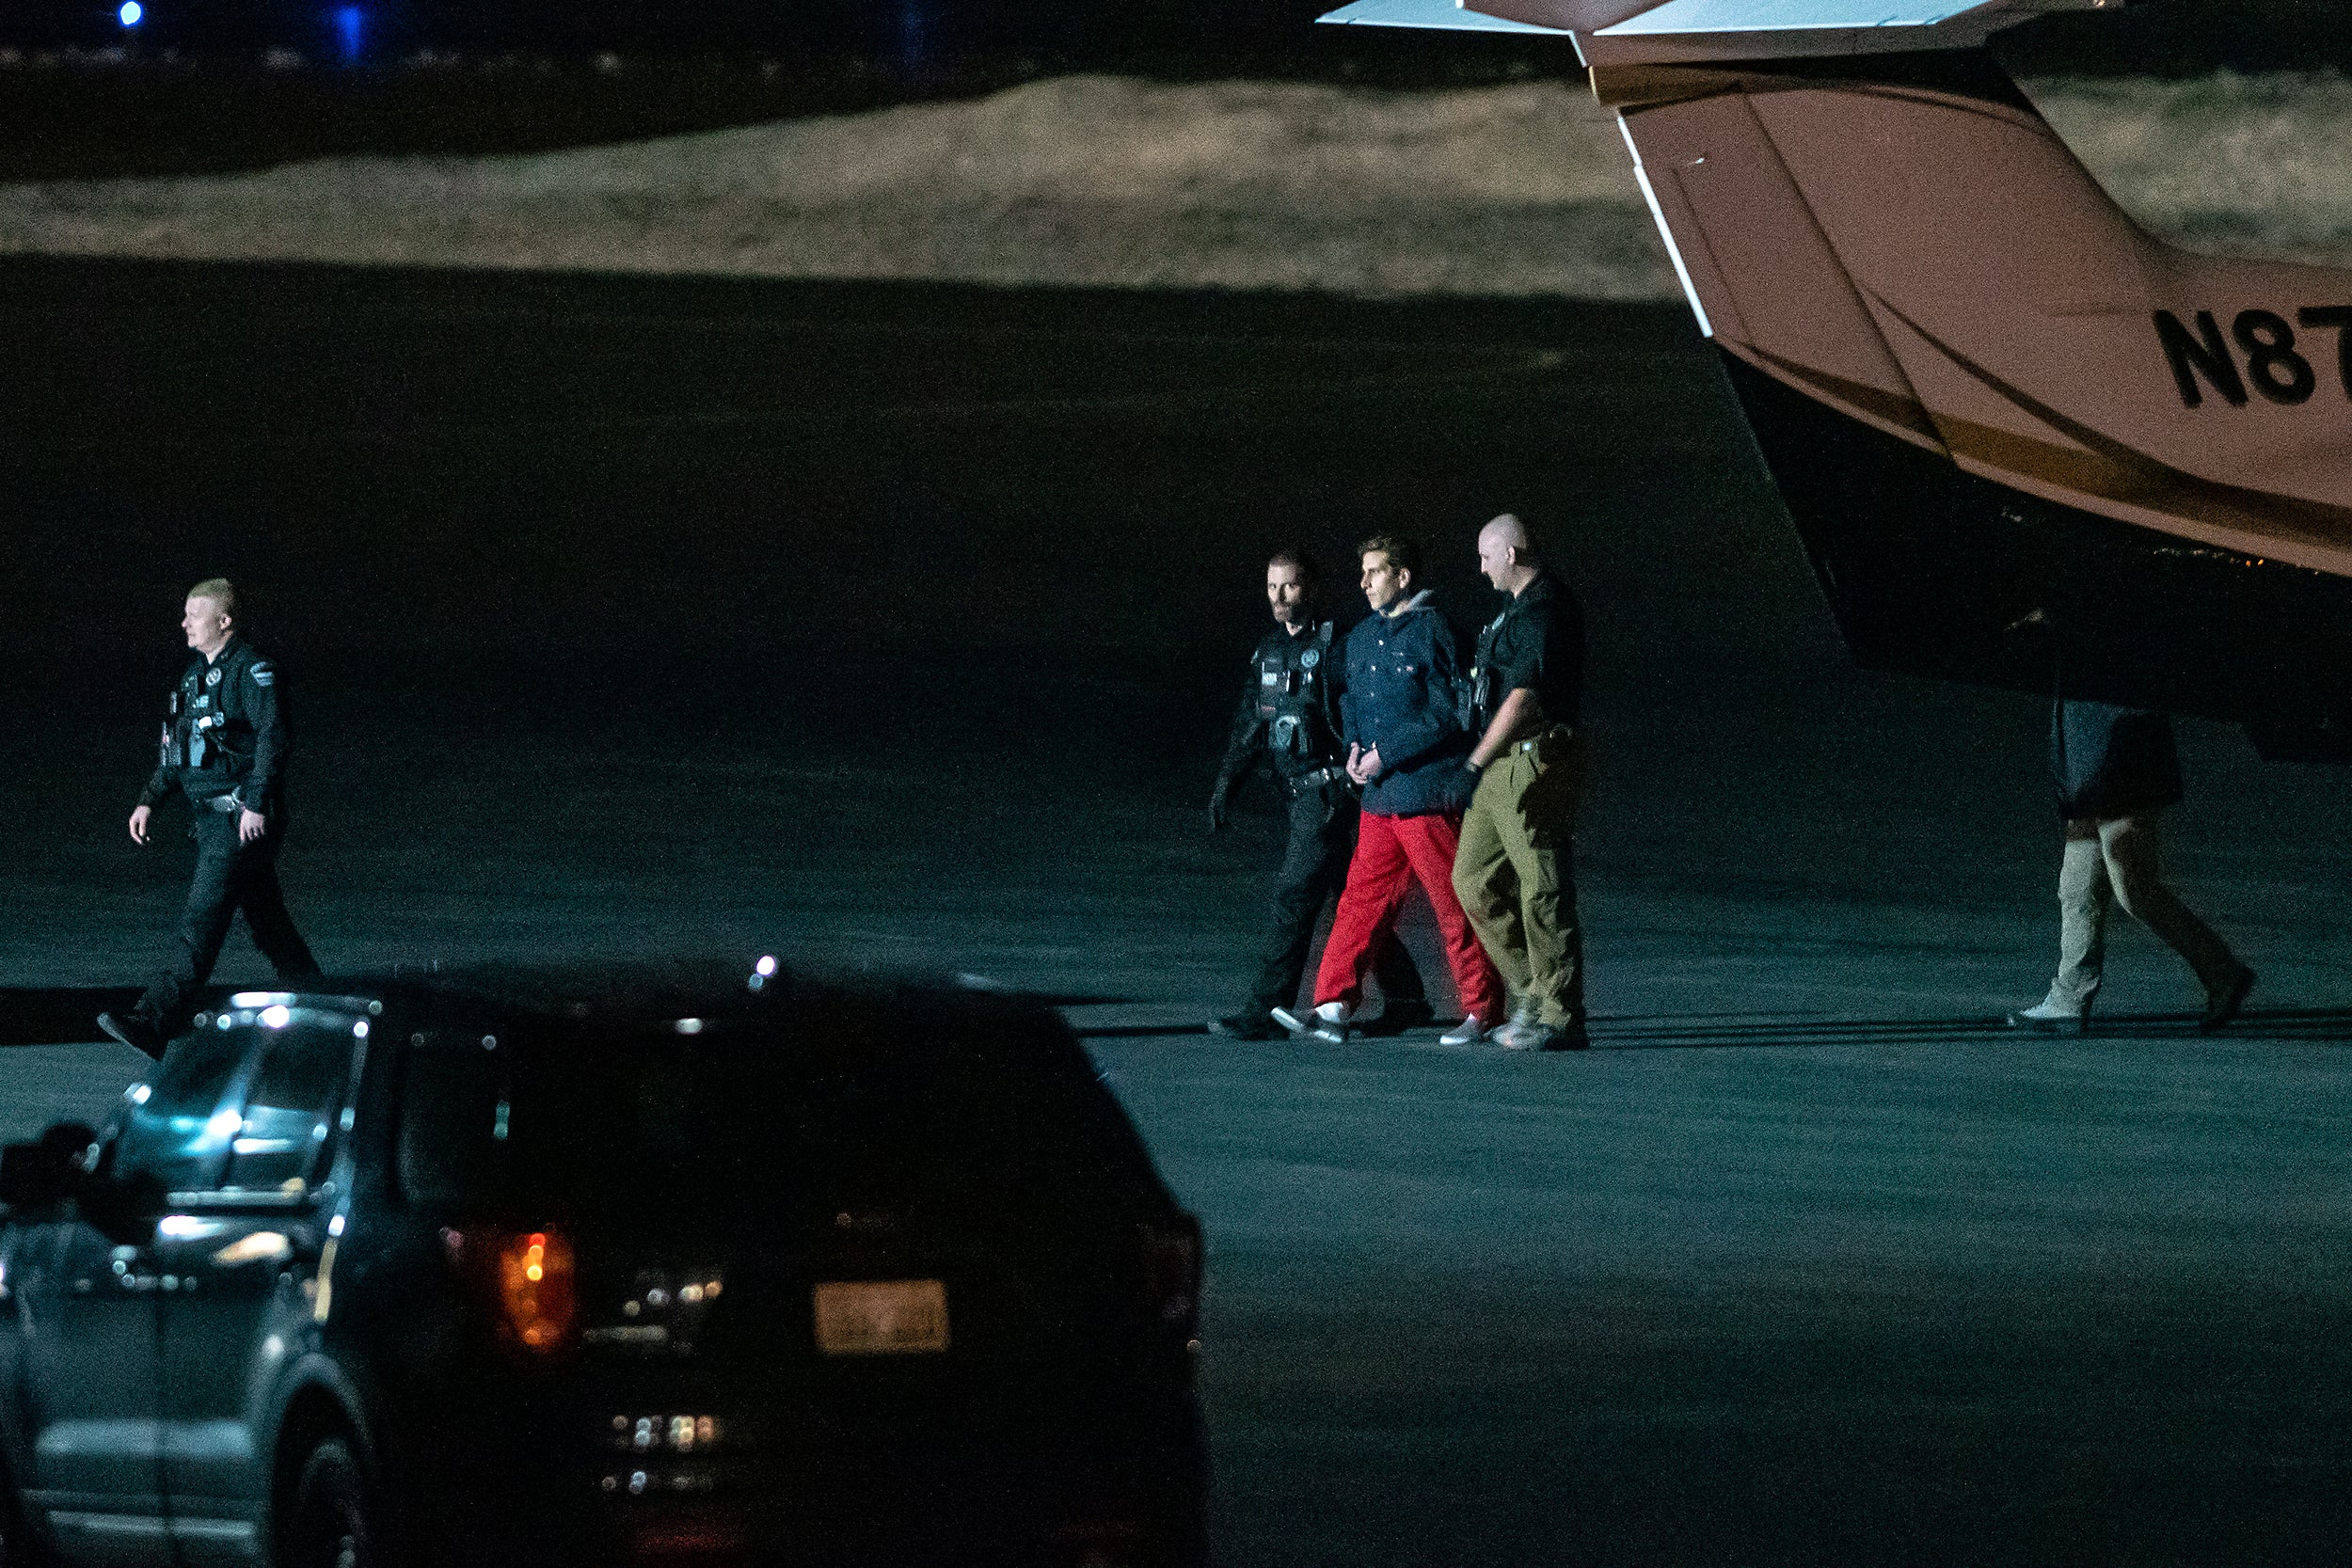 Bryan Kohberger is escorted from the plane at Pullman-Moscow Regional Airport on Wednesday